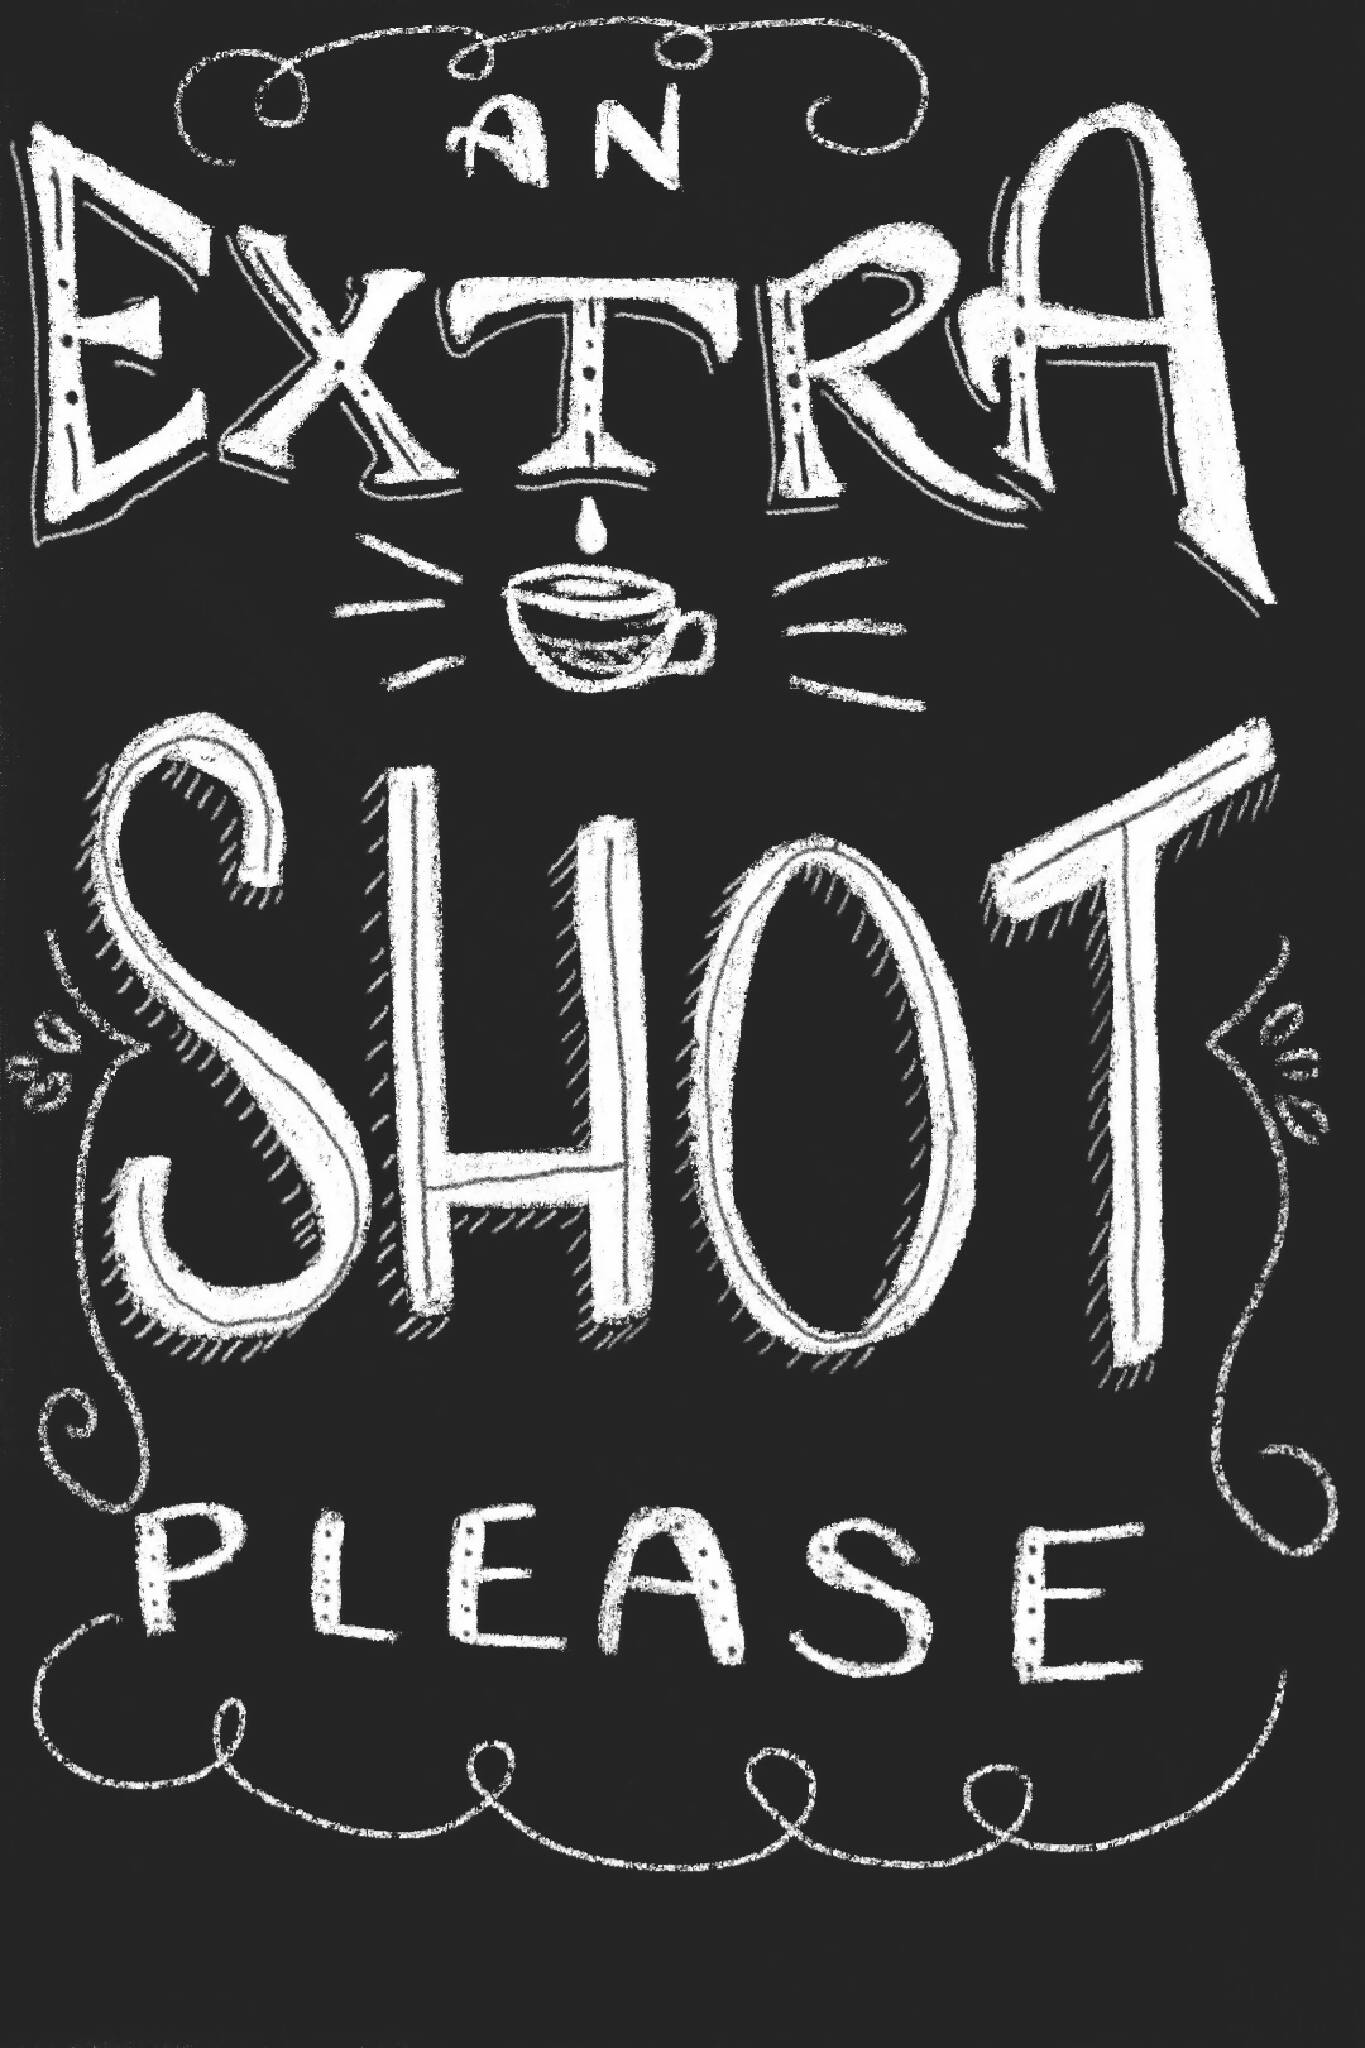 Extra shot please hand painted A4 print, PRINT ONLY no frame or mount.